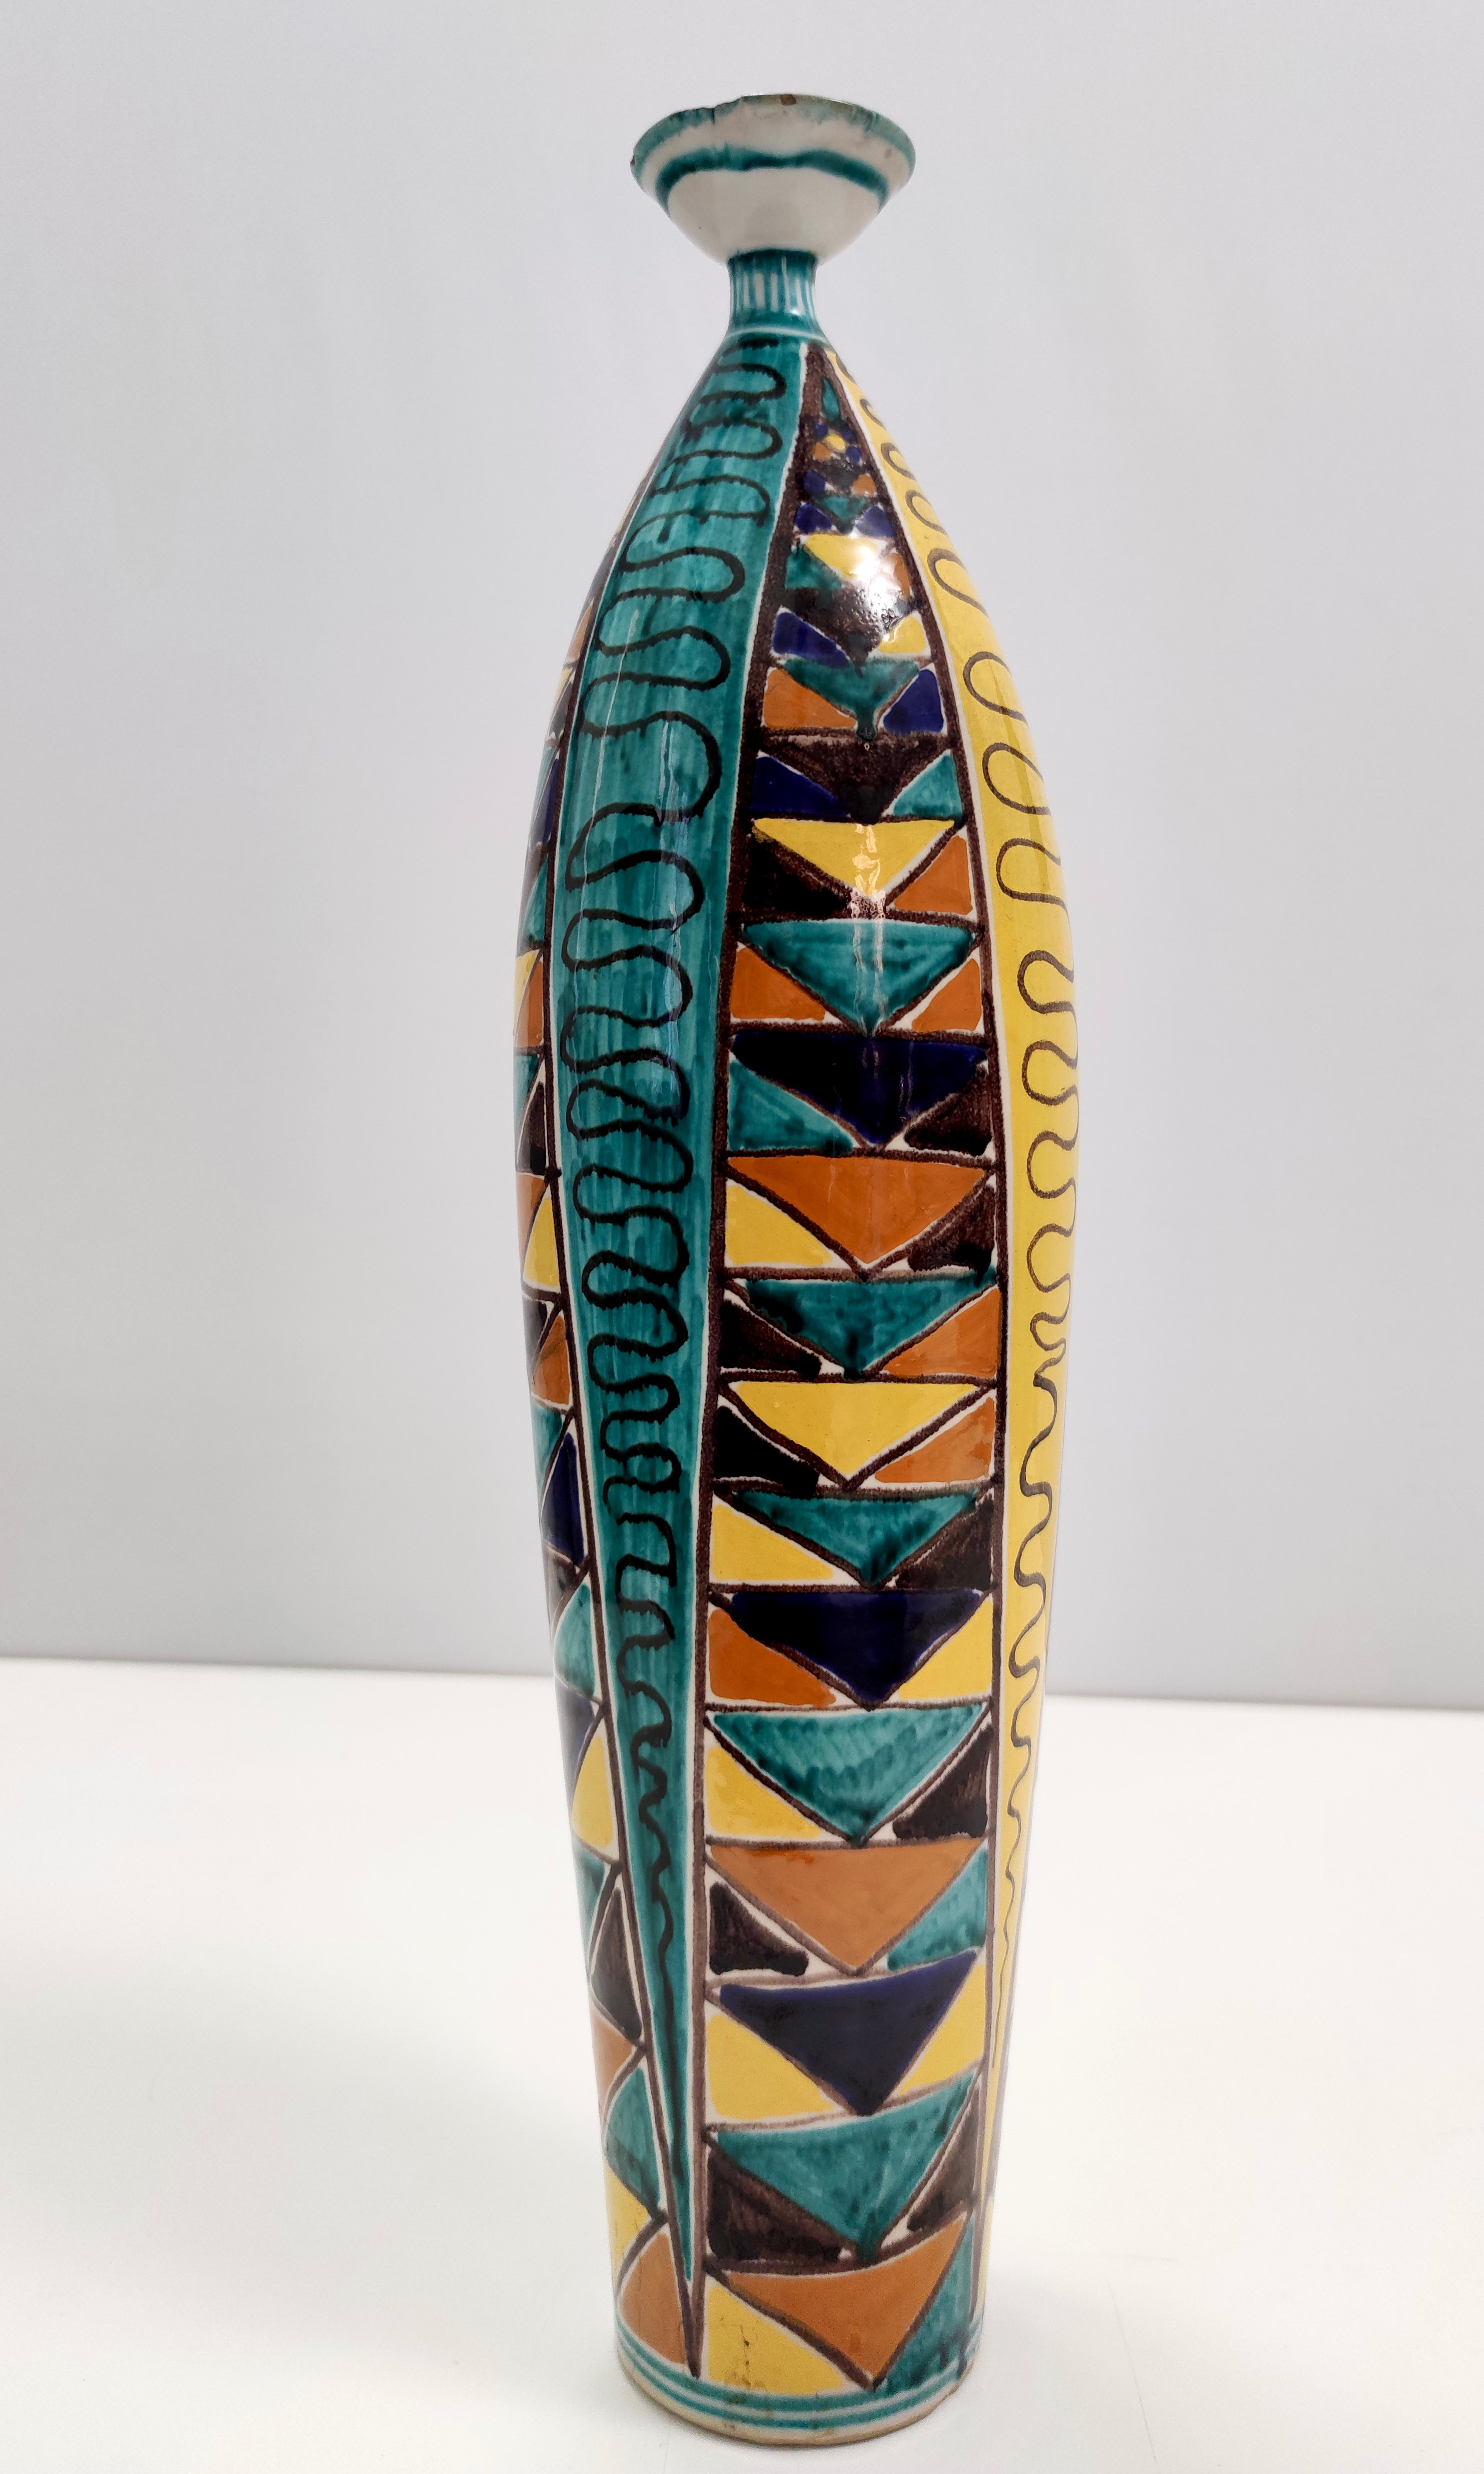 Vintage Multicolored Lacquered Ceramic Vase with Geometric Patterns, Italy In Good Condition For Sale In Bresso, Lombardy